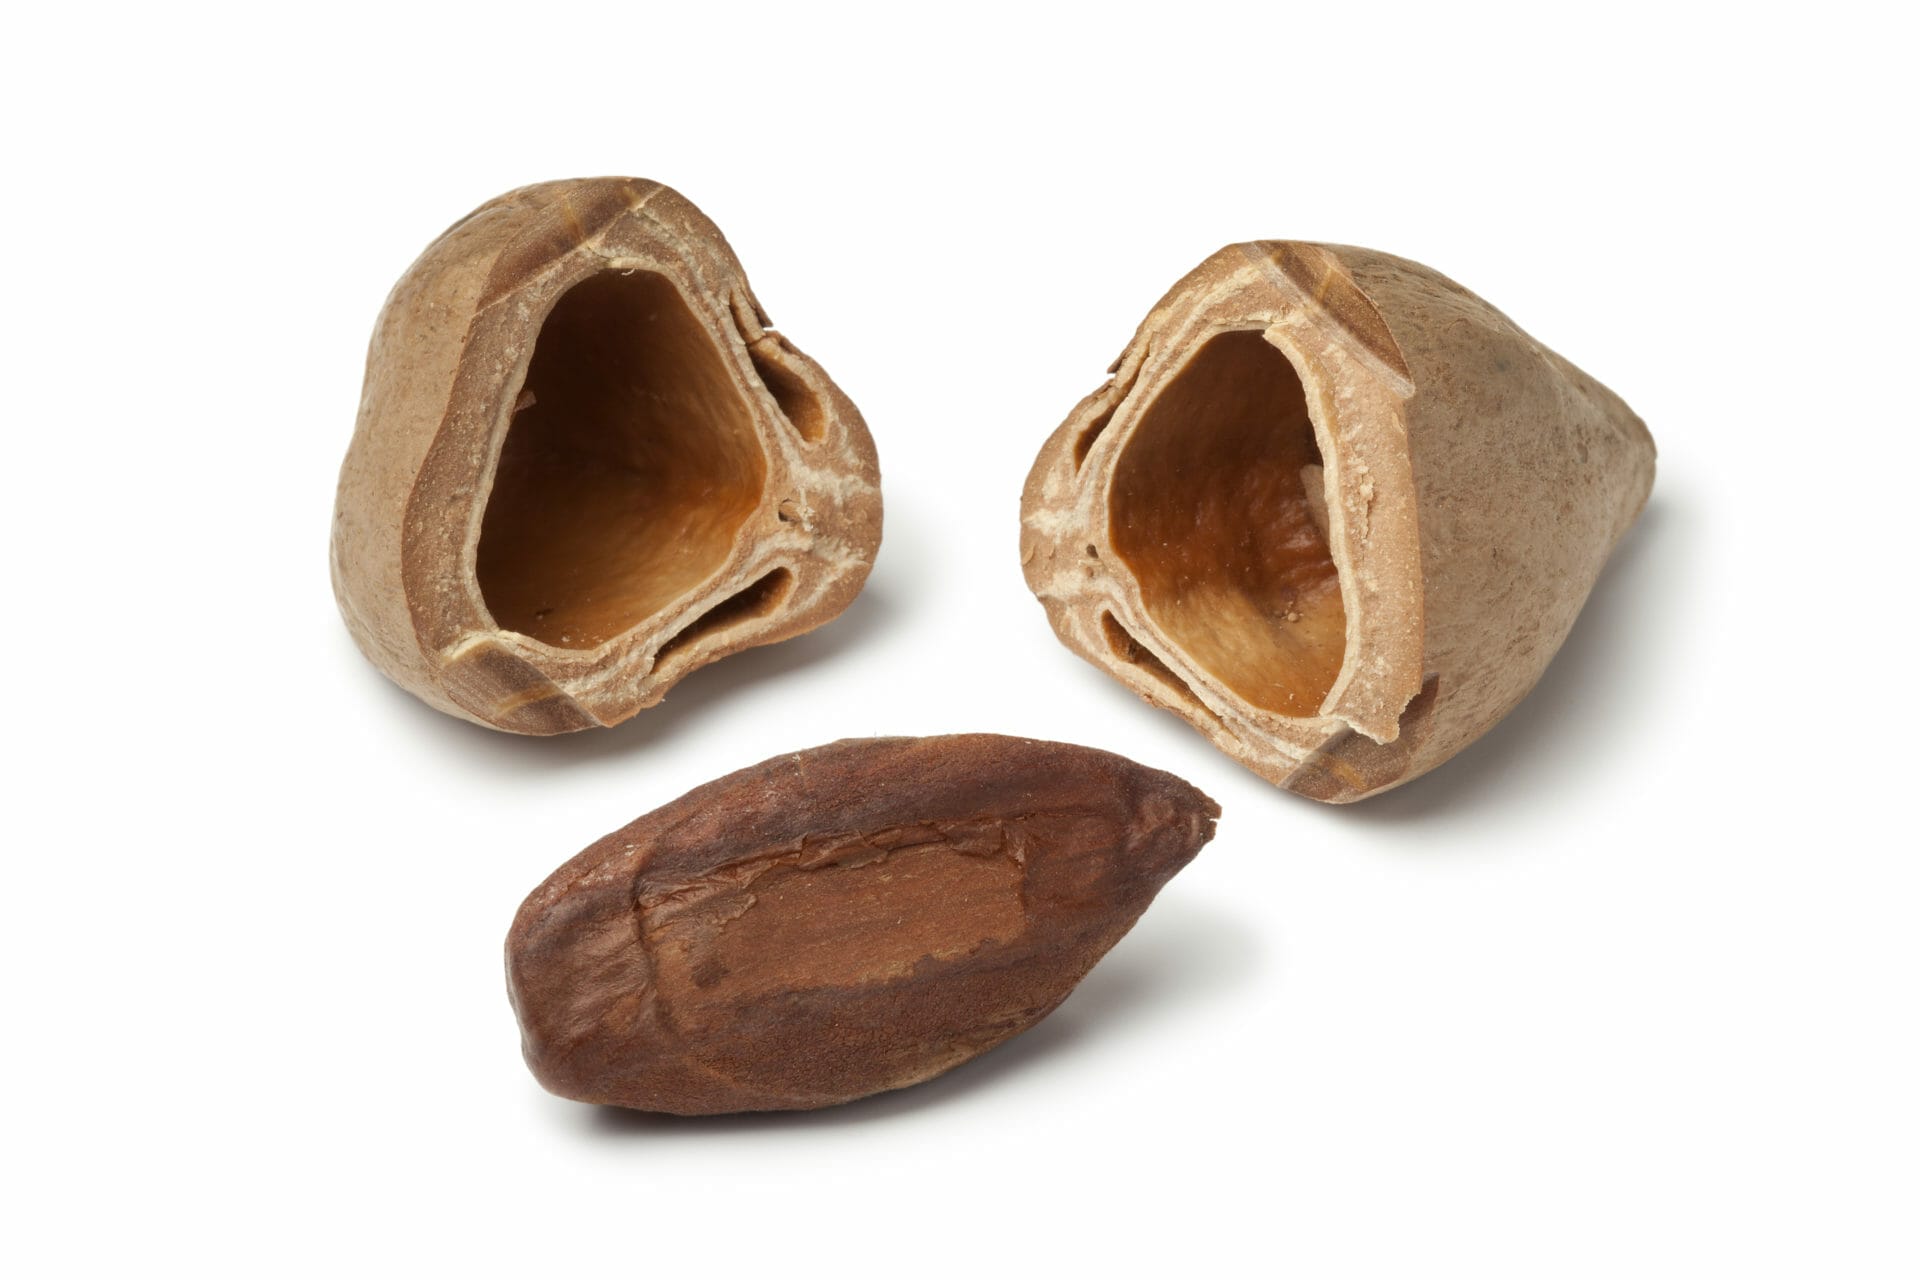 Pili nuts are a newcomer in the ketogenic community